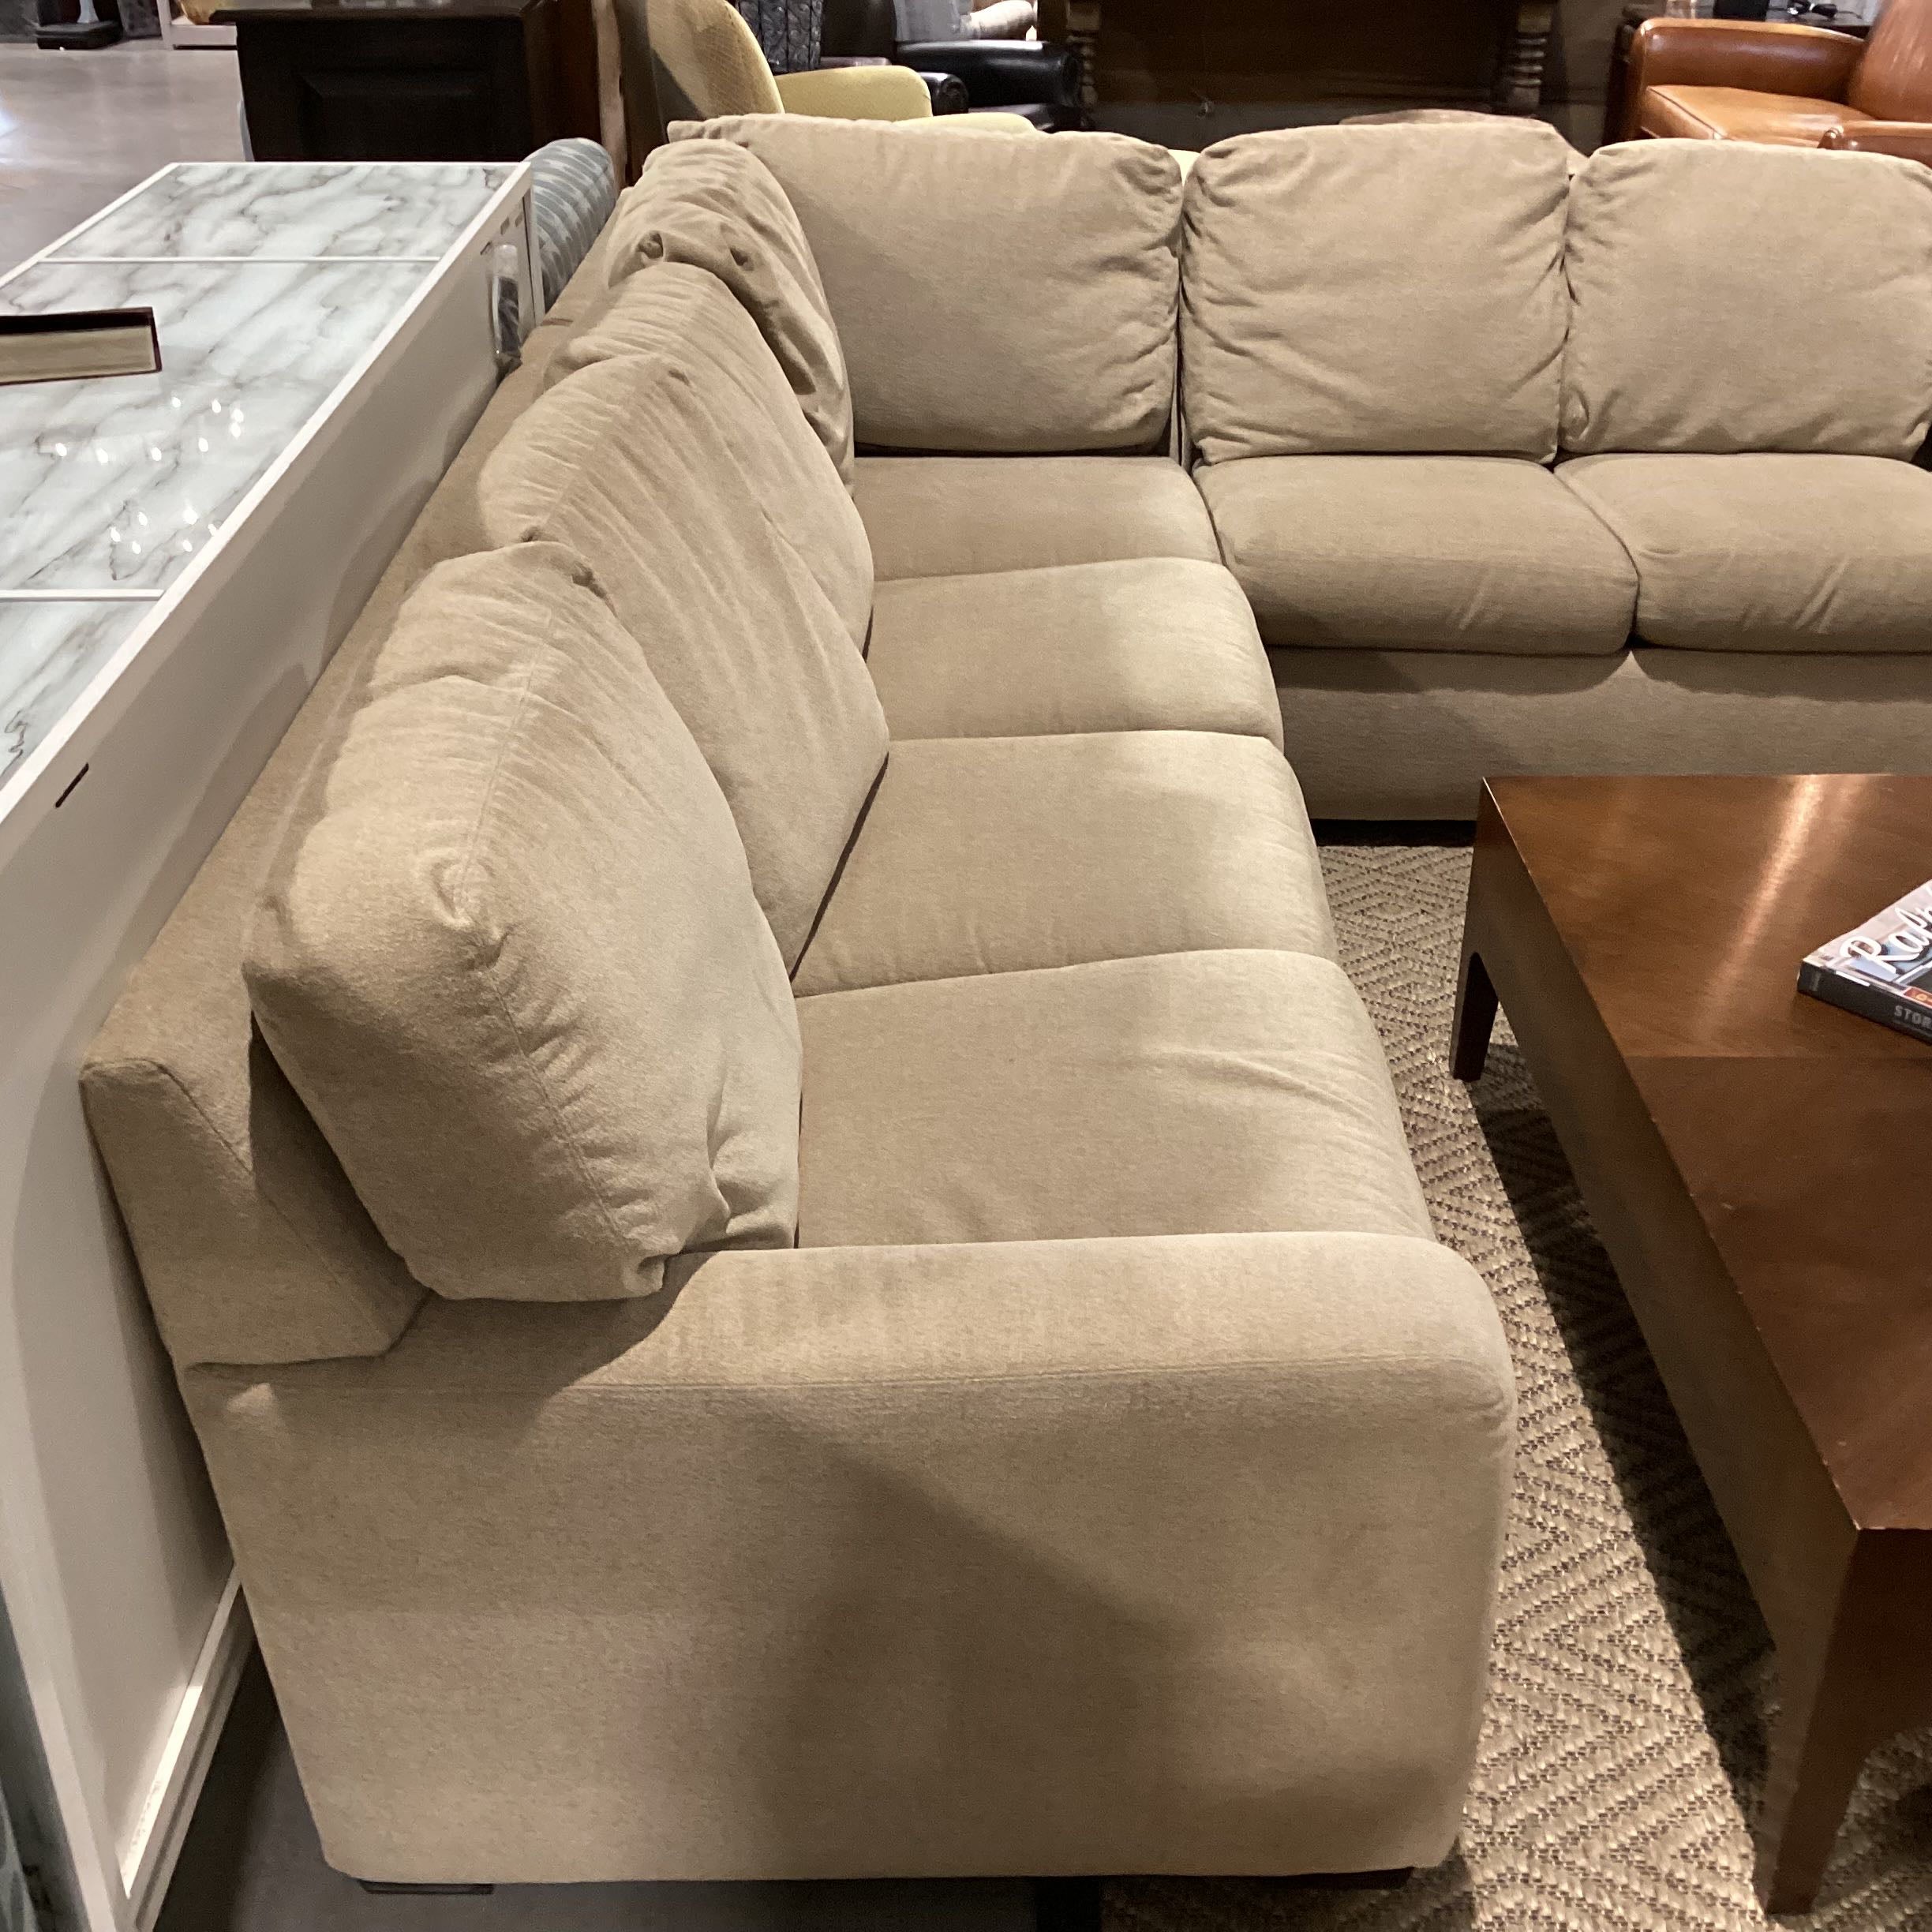 American Leather Beige Tan Upholstered 3 Piece Sectional